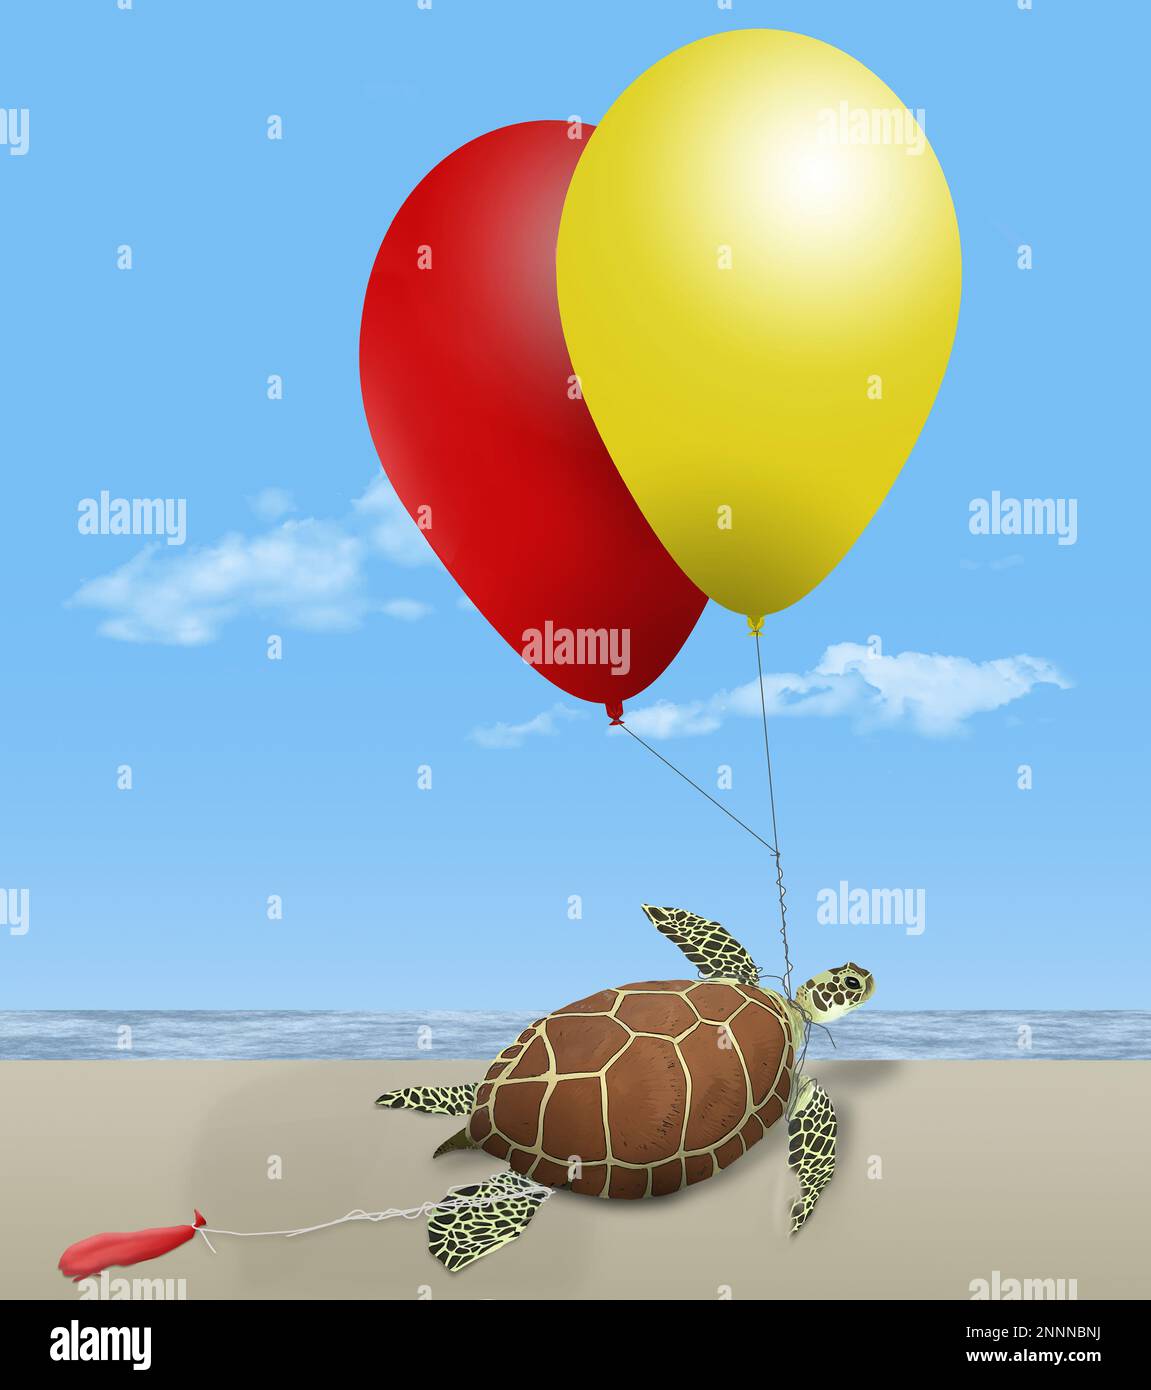 A green sea turtle on a beach by the ocean is seen tangled in helium party balloons . This is a 3-D illustration. Stock Photo